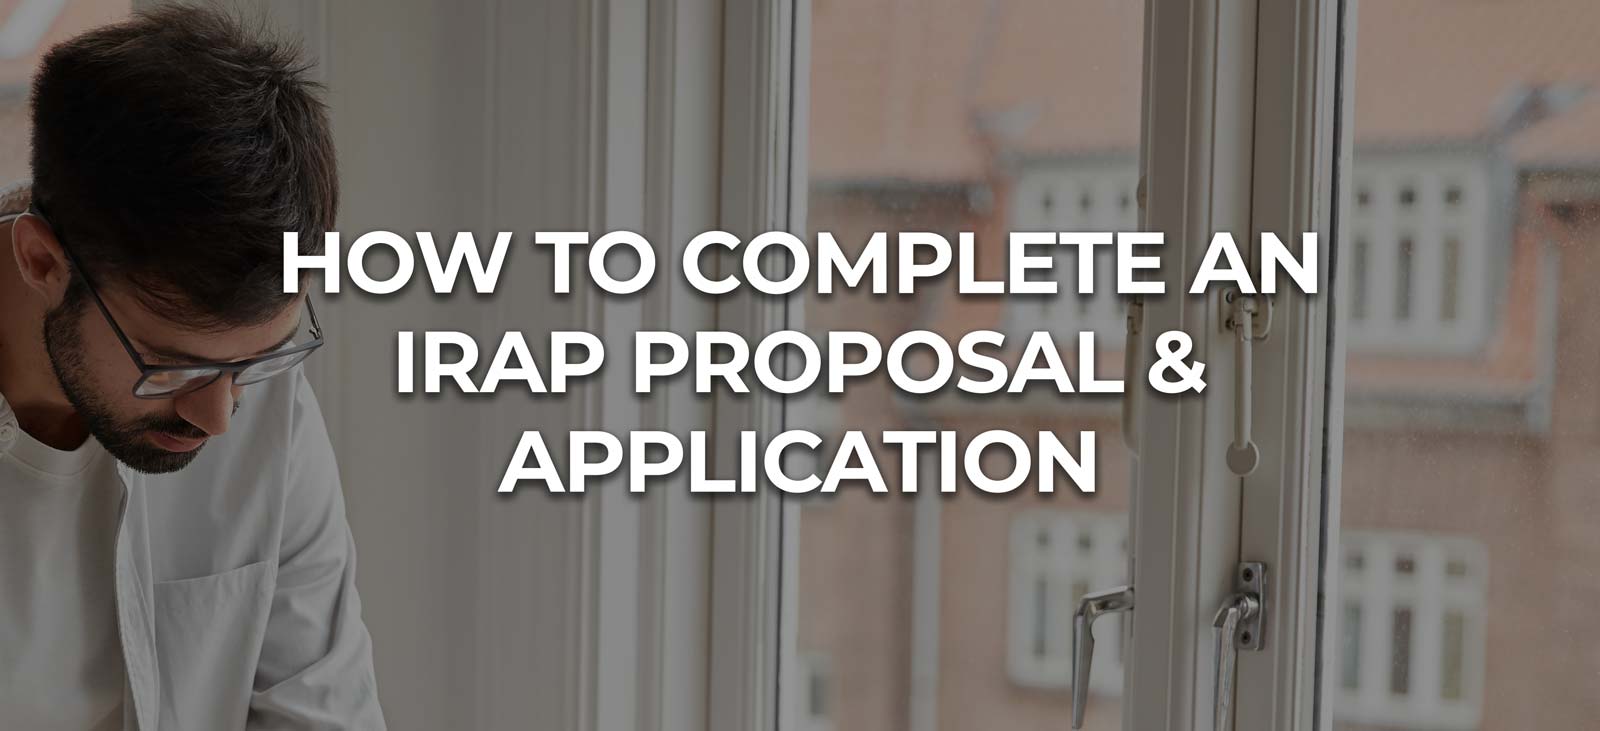 How to complete an IRAP proposal and application - graphic